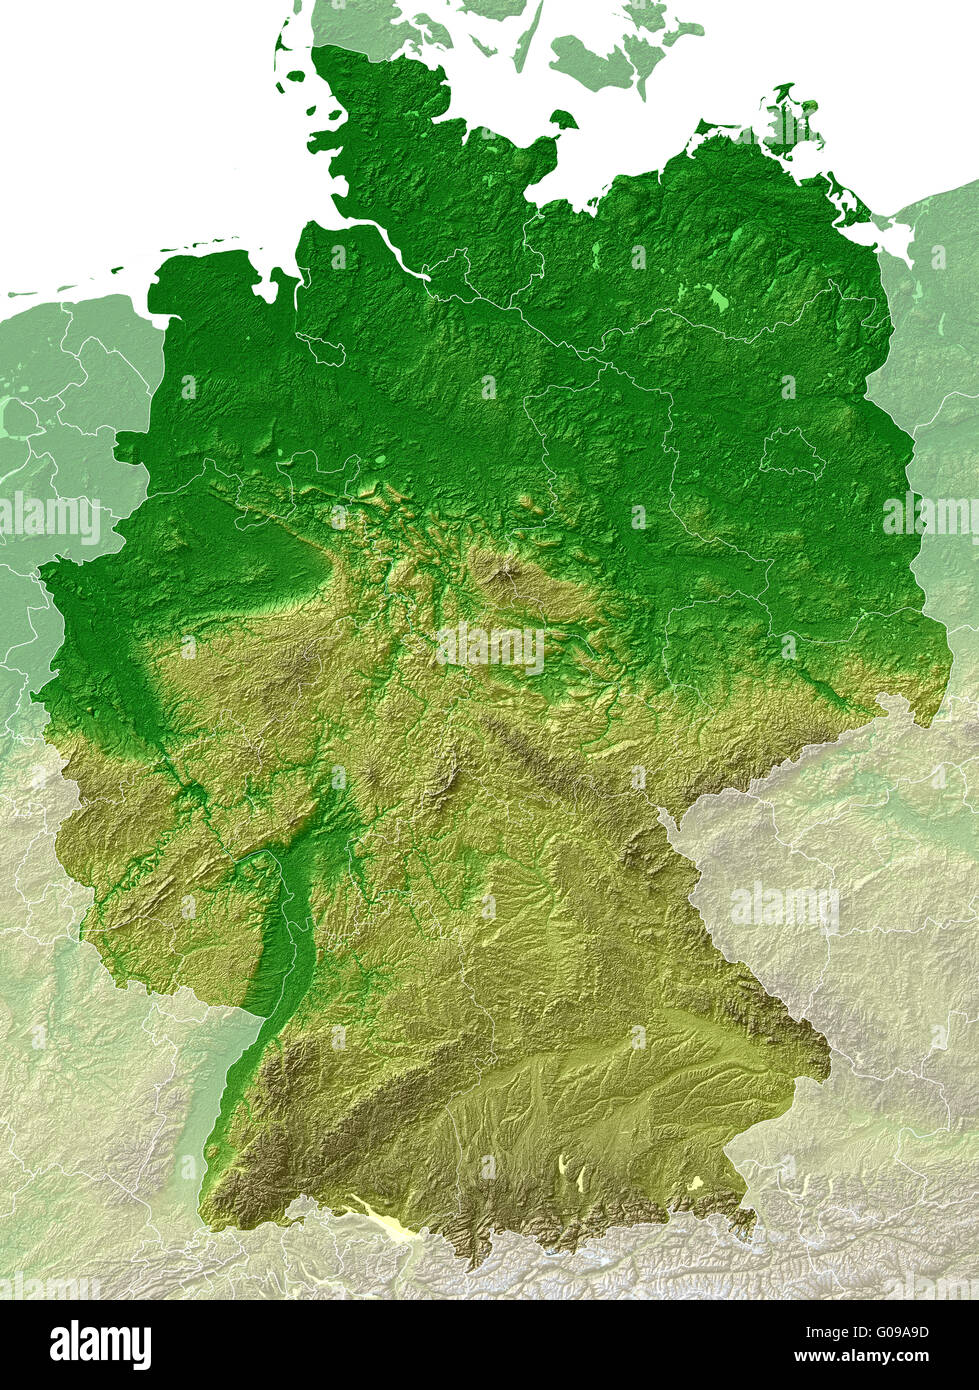 Germany - relief map + borders Stock Photo